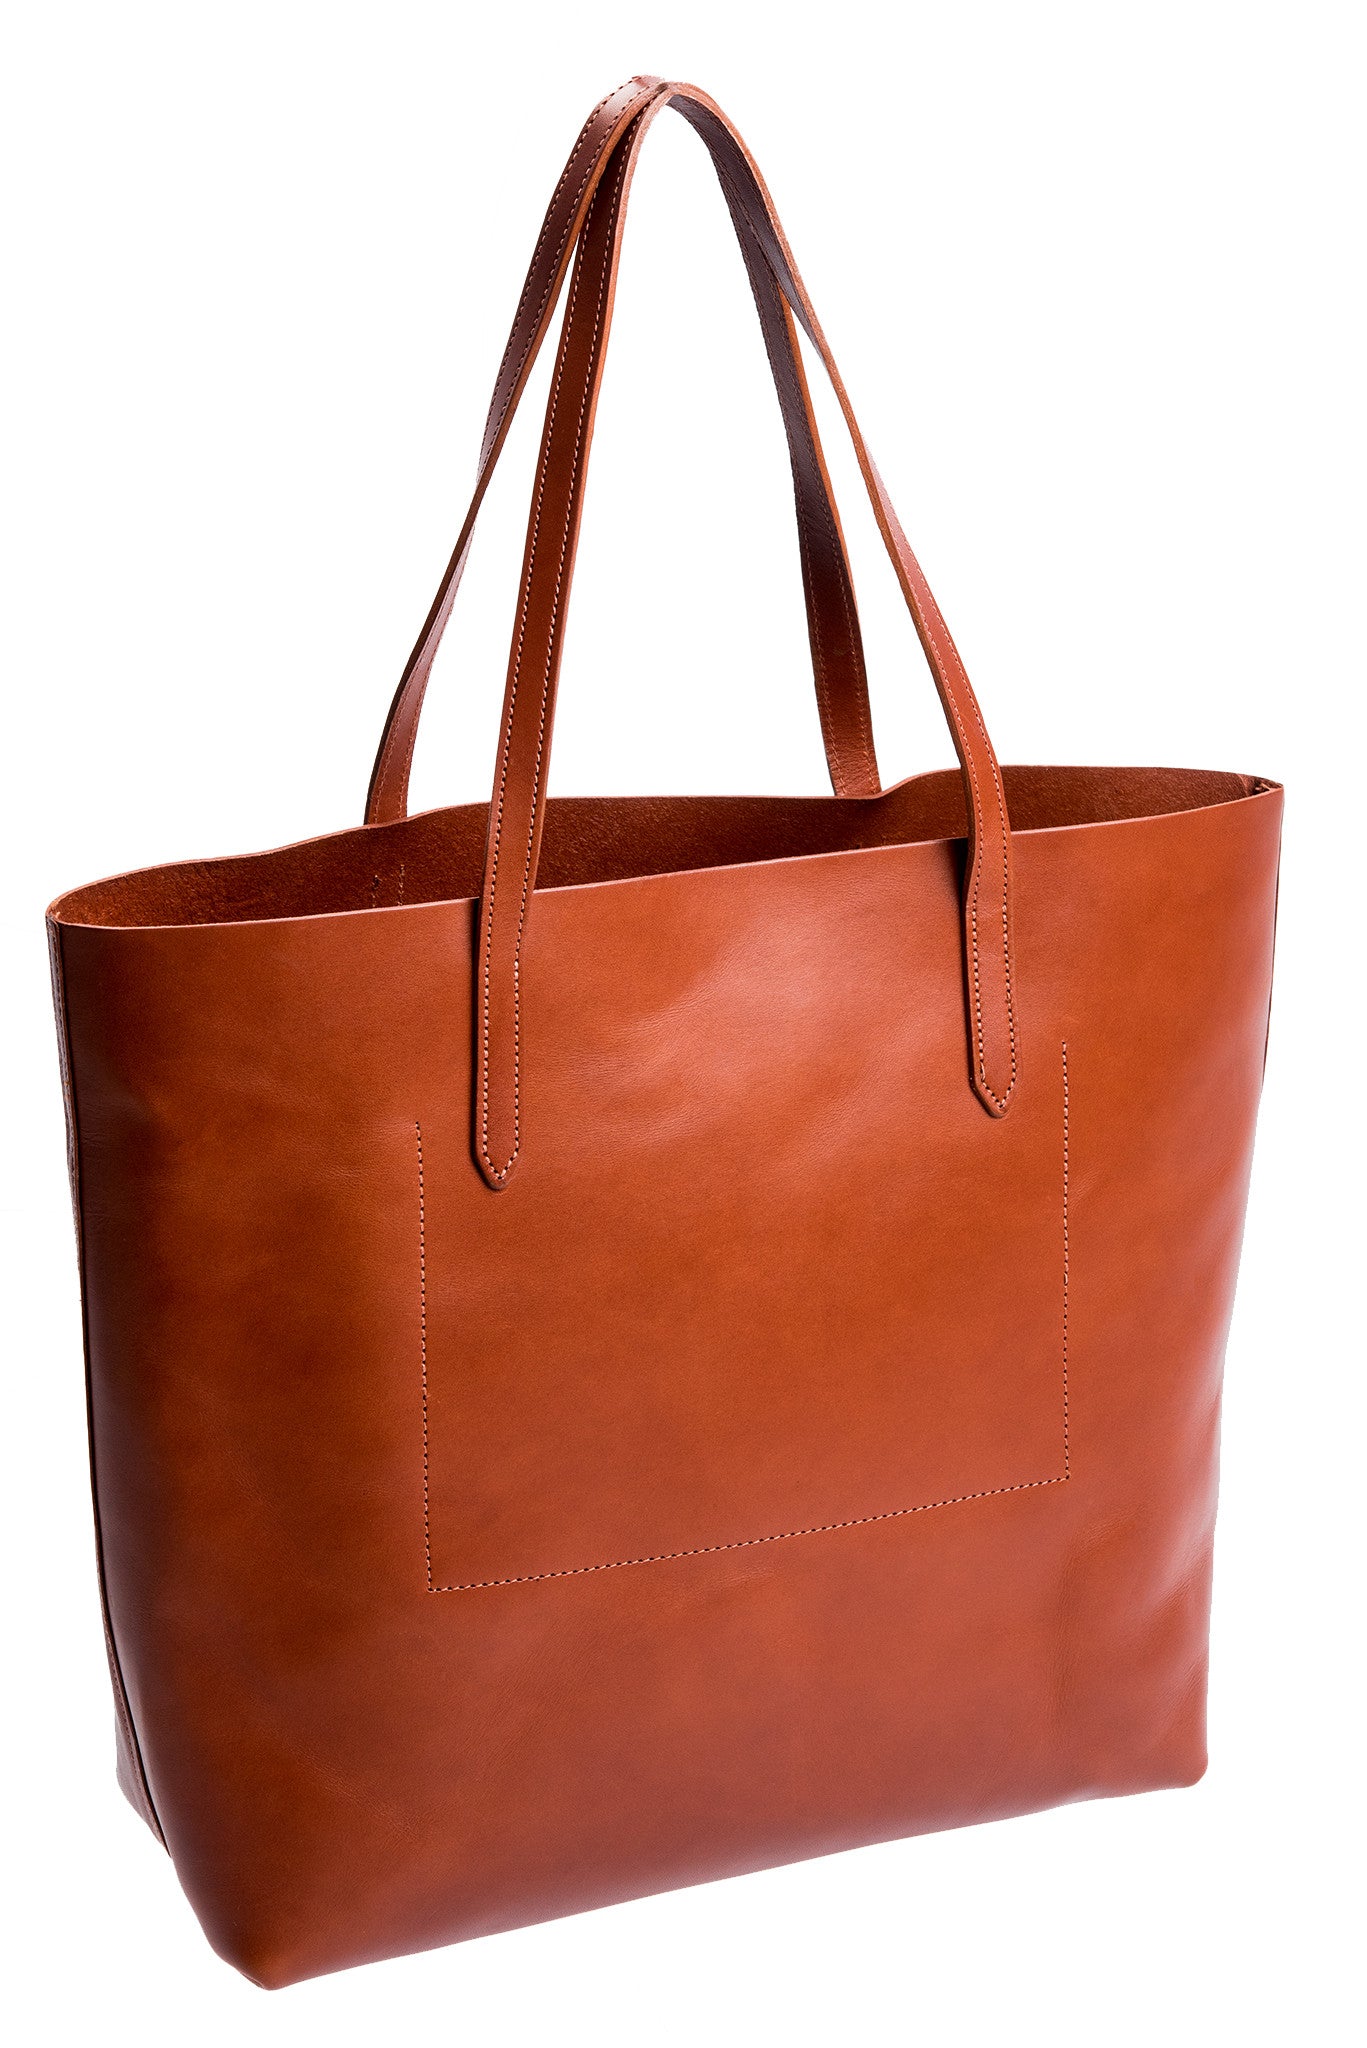 FOTO | The Highland Leather Tote - Cognac - a genuine leather tote in chestnut brown vegetable tanned leather can be personalized with gold foil initials, making it the perfect personalized gift.